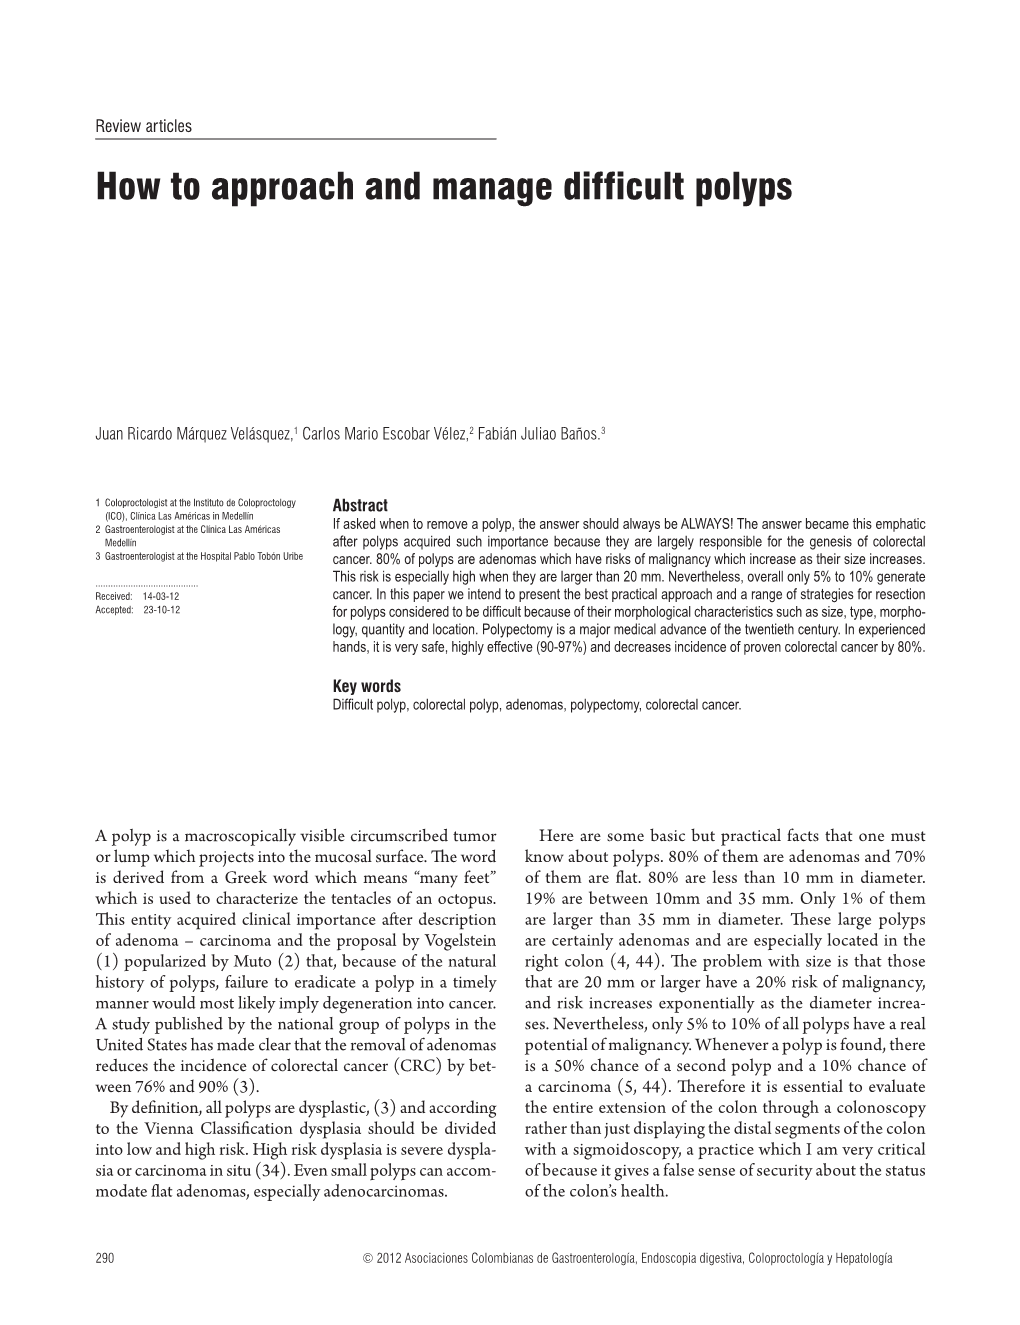 How to Approach and Manage Difficult Polyps